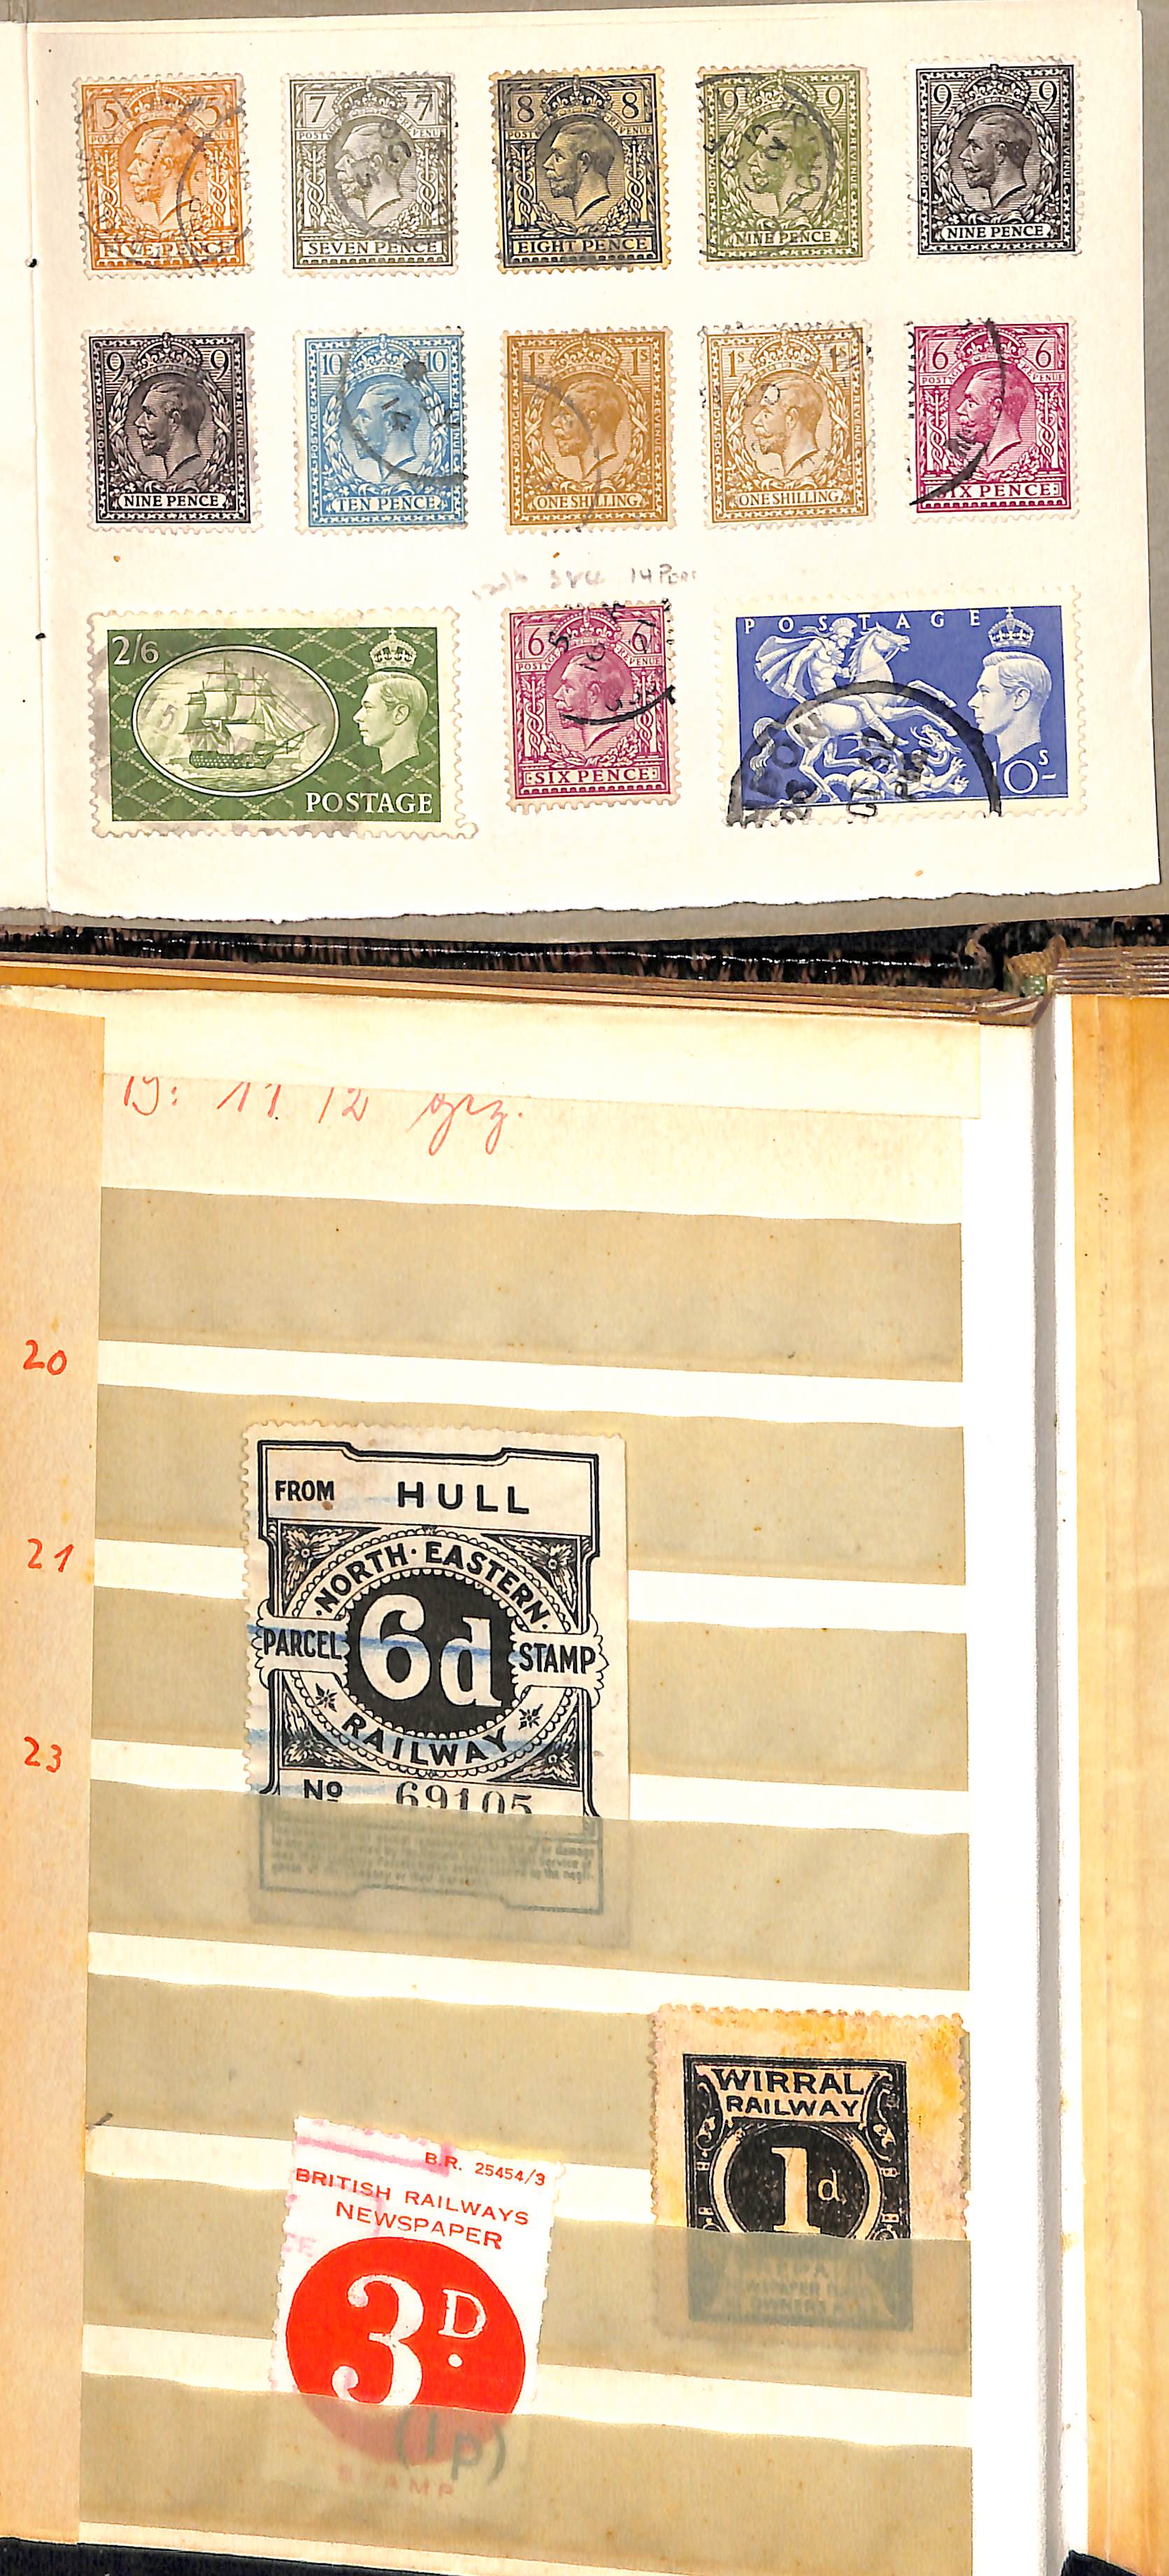 QV-QEII Stamps including 1840 2d and 1891 £1 (both with faults), 1958 3d tete-beche strip, 1969 £1 - Image 11 of 22